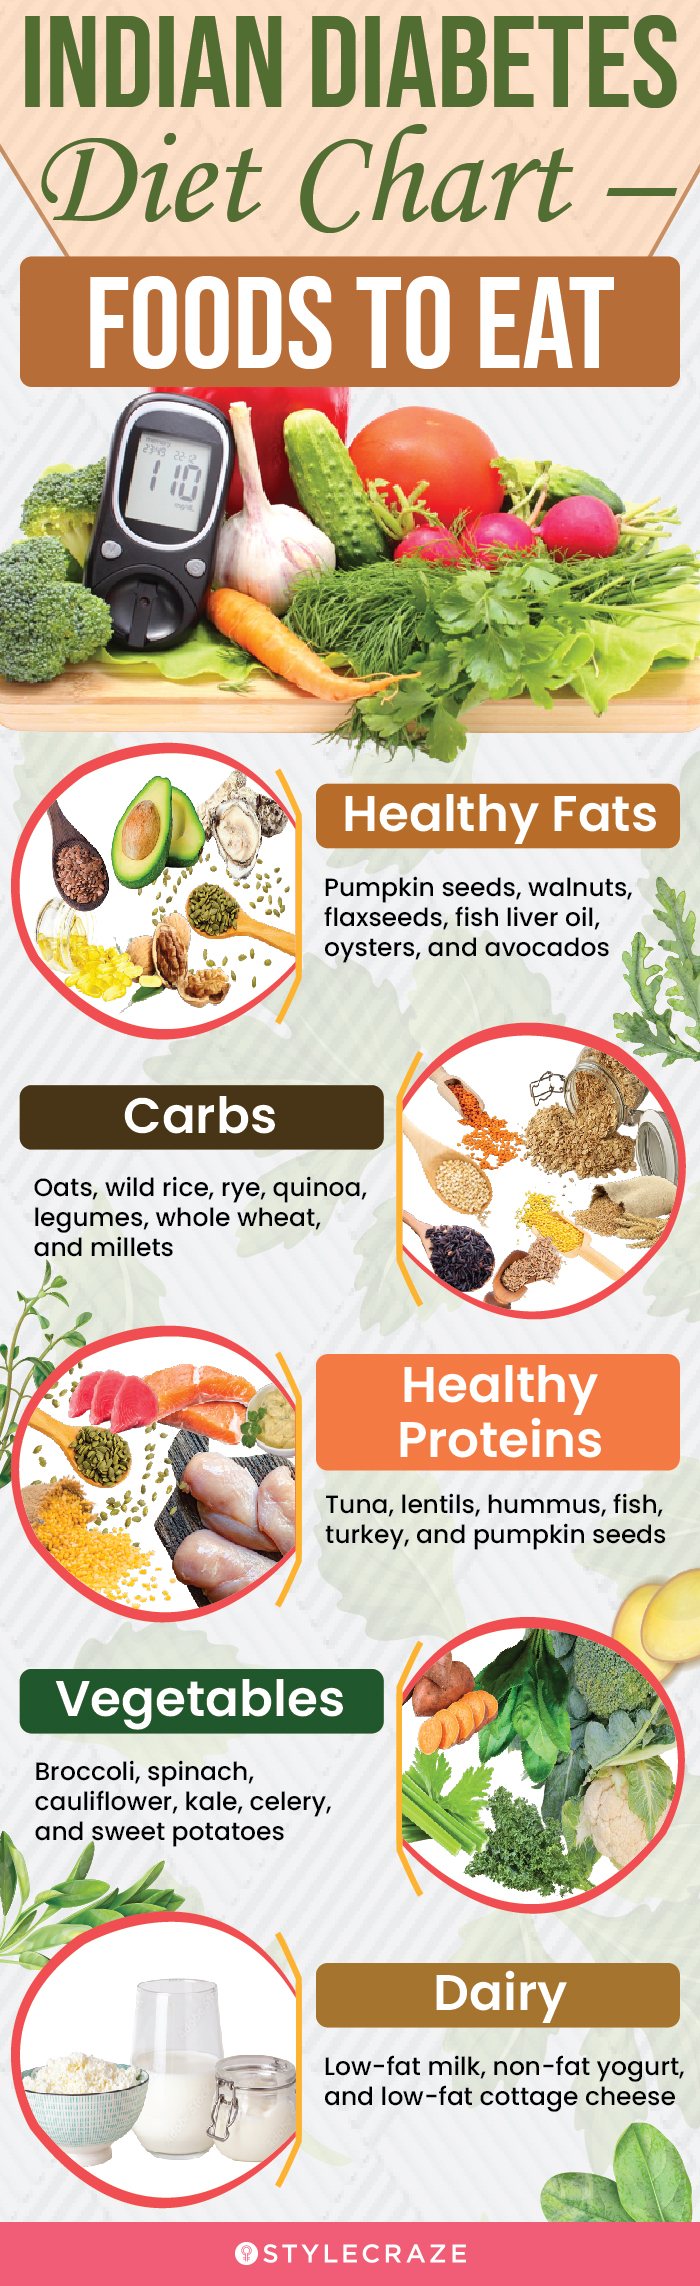 indian diabetes diet chart – foods to eat[infographic]